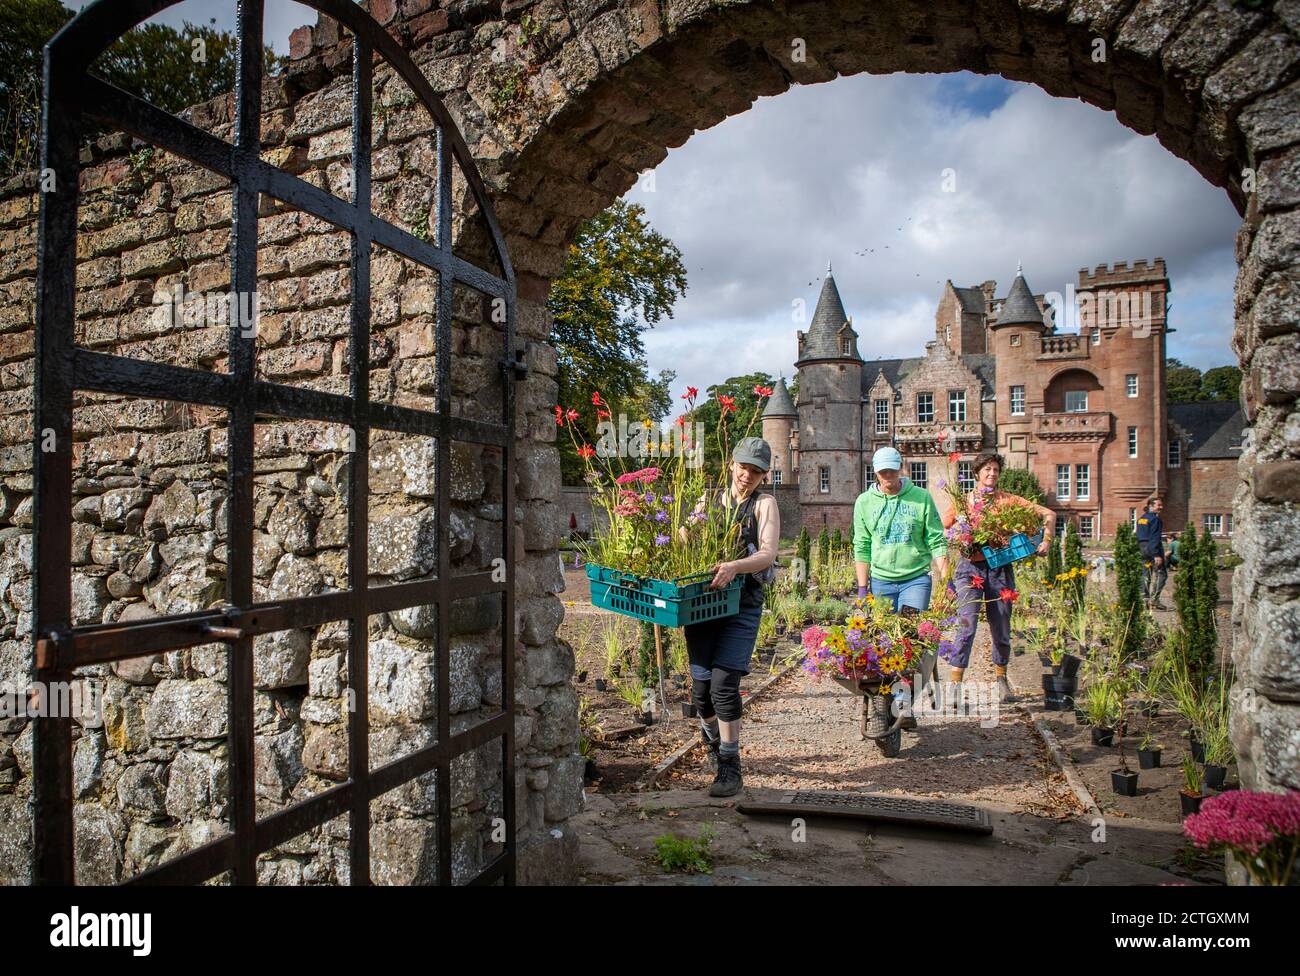 Volunteers (left to right) Kim Moore, Afton Esplin and Jane Porter help with planting for the new garden created by horticulturist and designer Nigel Dunnett in response to the 800 year garden history of the site at Hospitalfield in Arbroath. Stock Photo